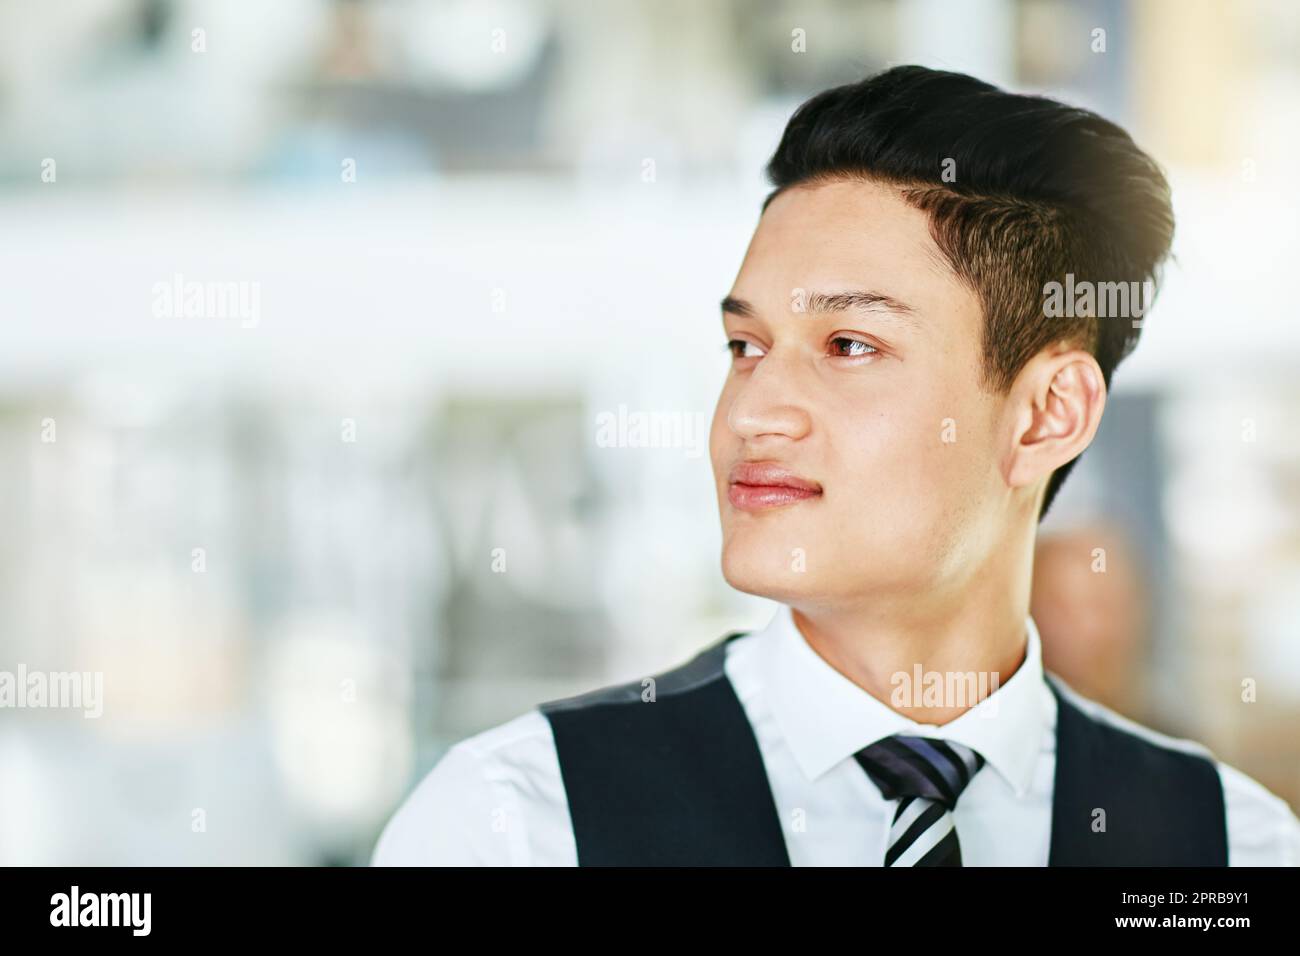 Young professional waiter, bartender or host looking confident, serious and wearing formal uniform on a blurred background. Closeup side profile, head and face of a man working in hospitality Stock Photo